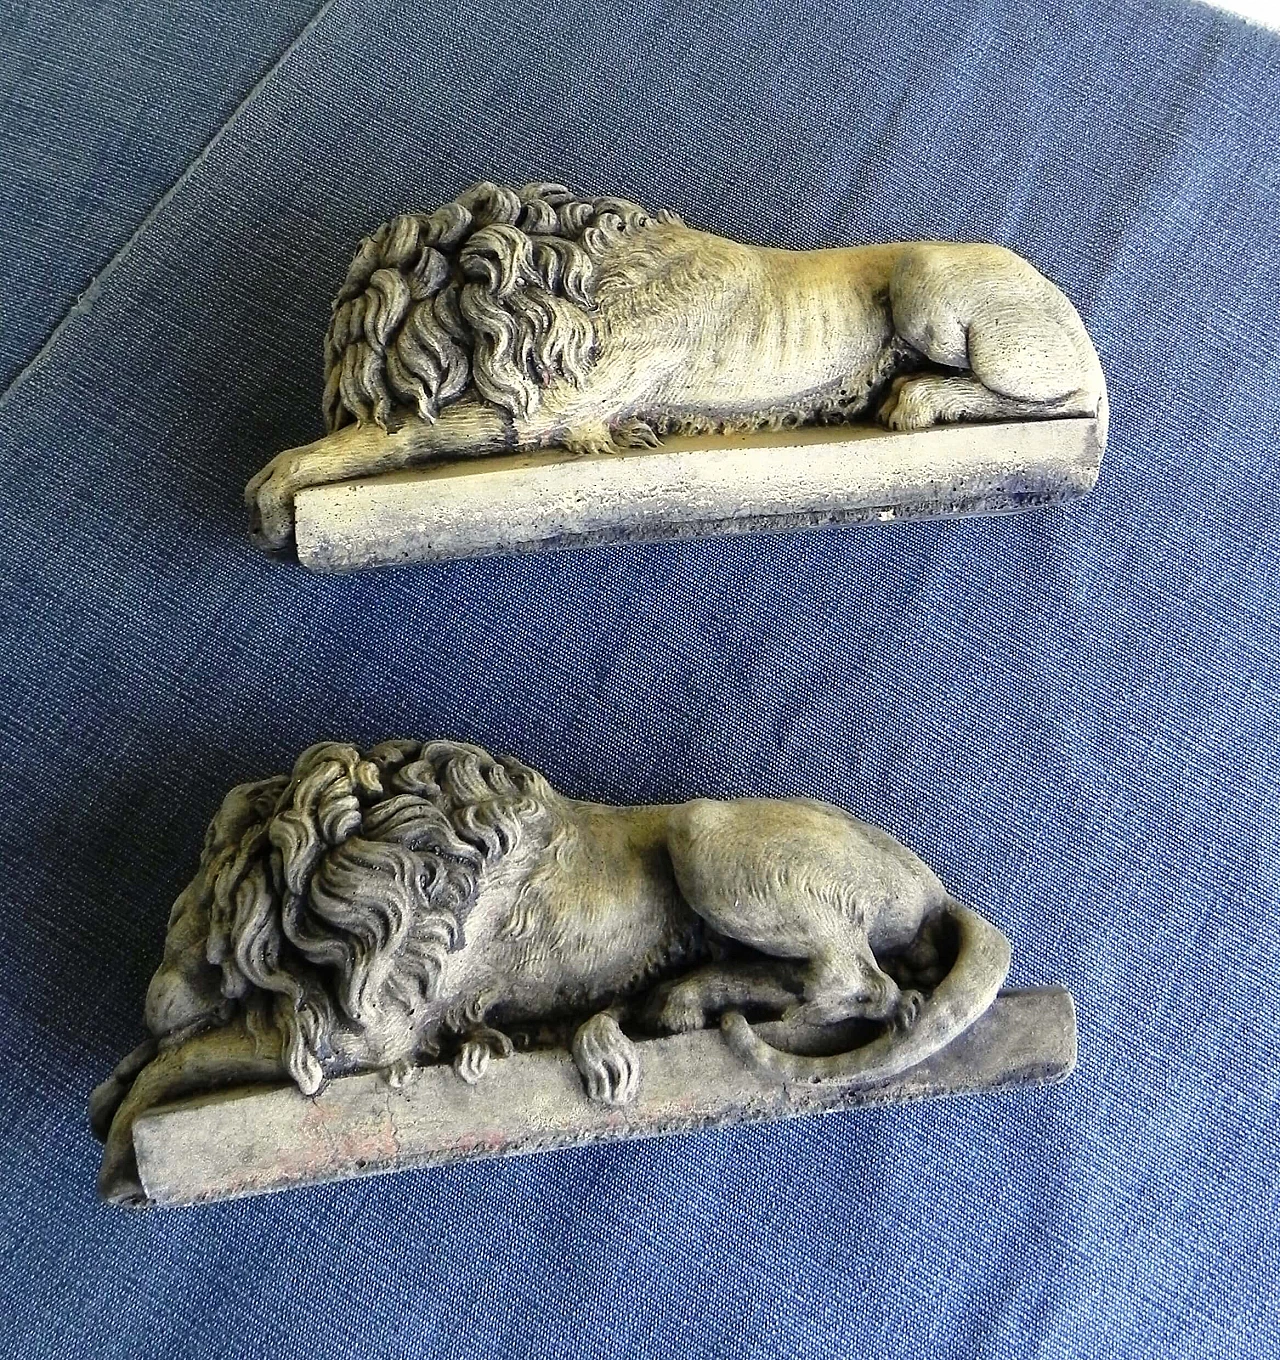 Pair of stone sculptures of sleeping lions 15